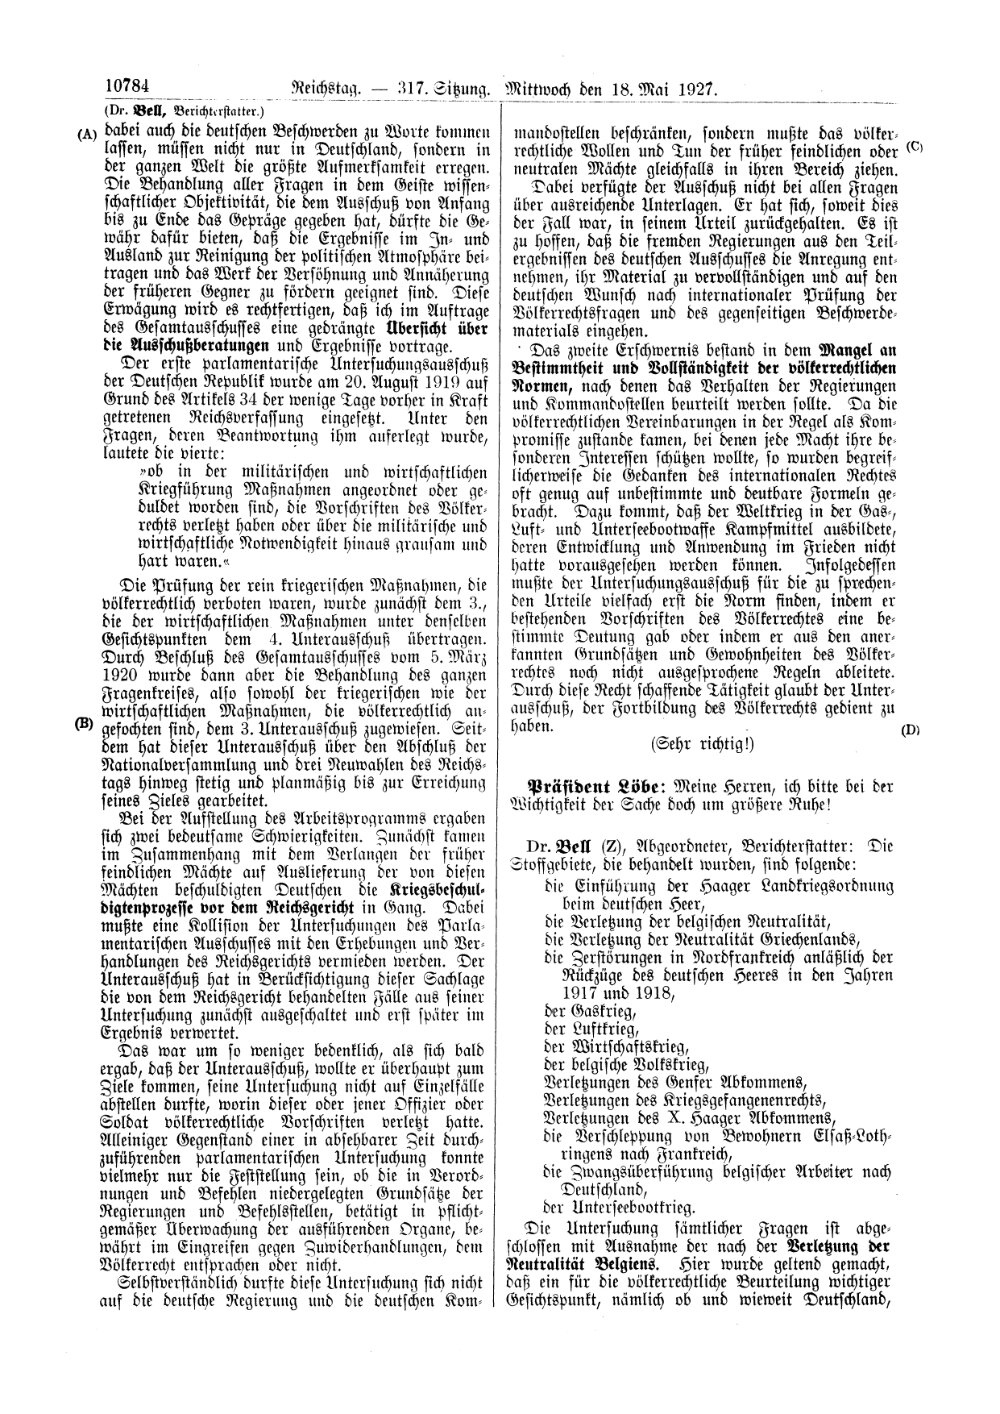 Scan of page 10784